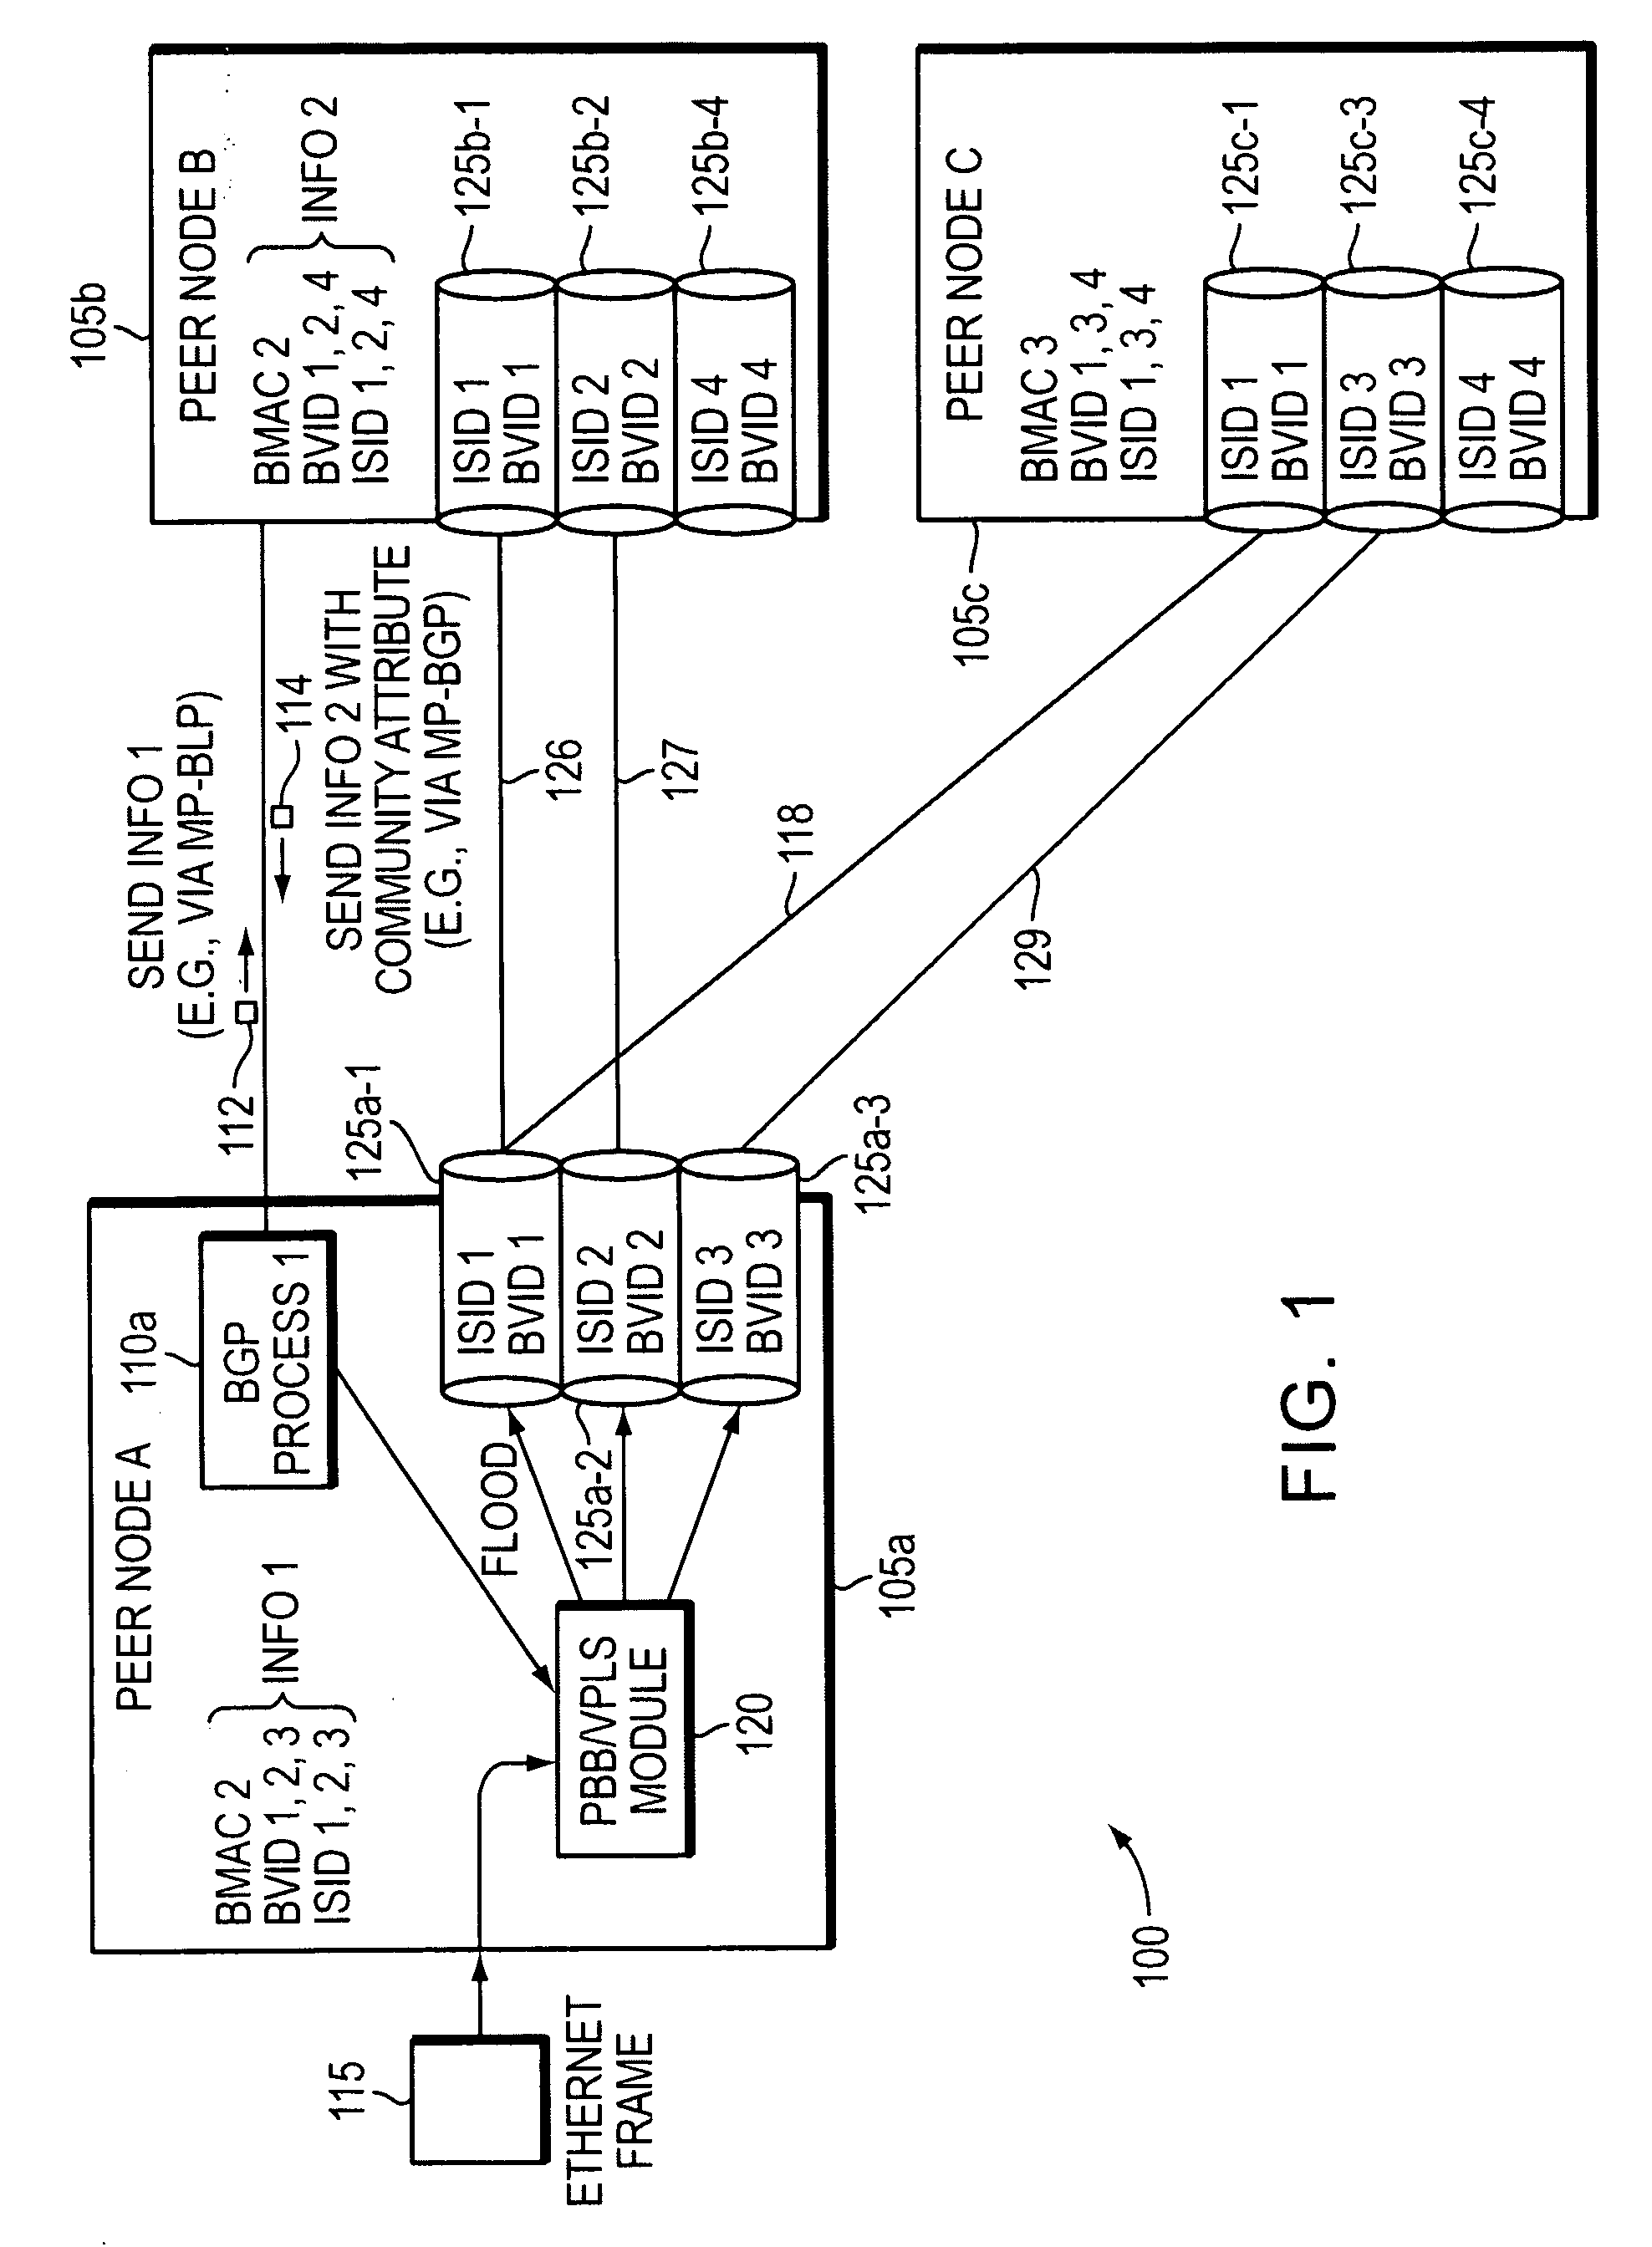 Method and apparatus for provisioning a network element